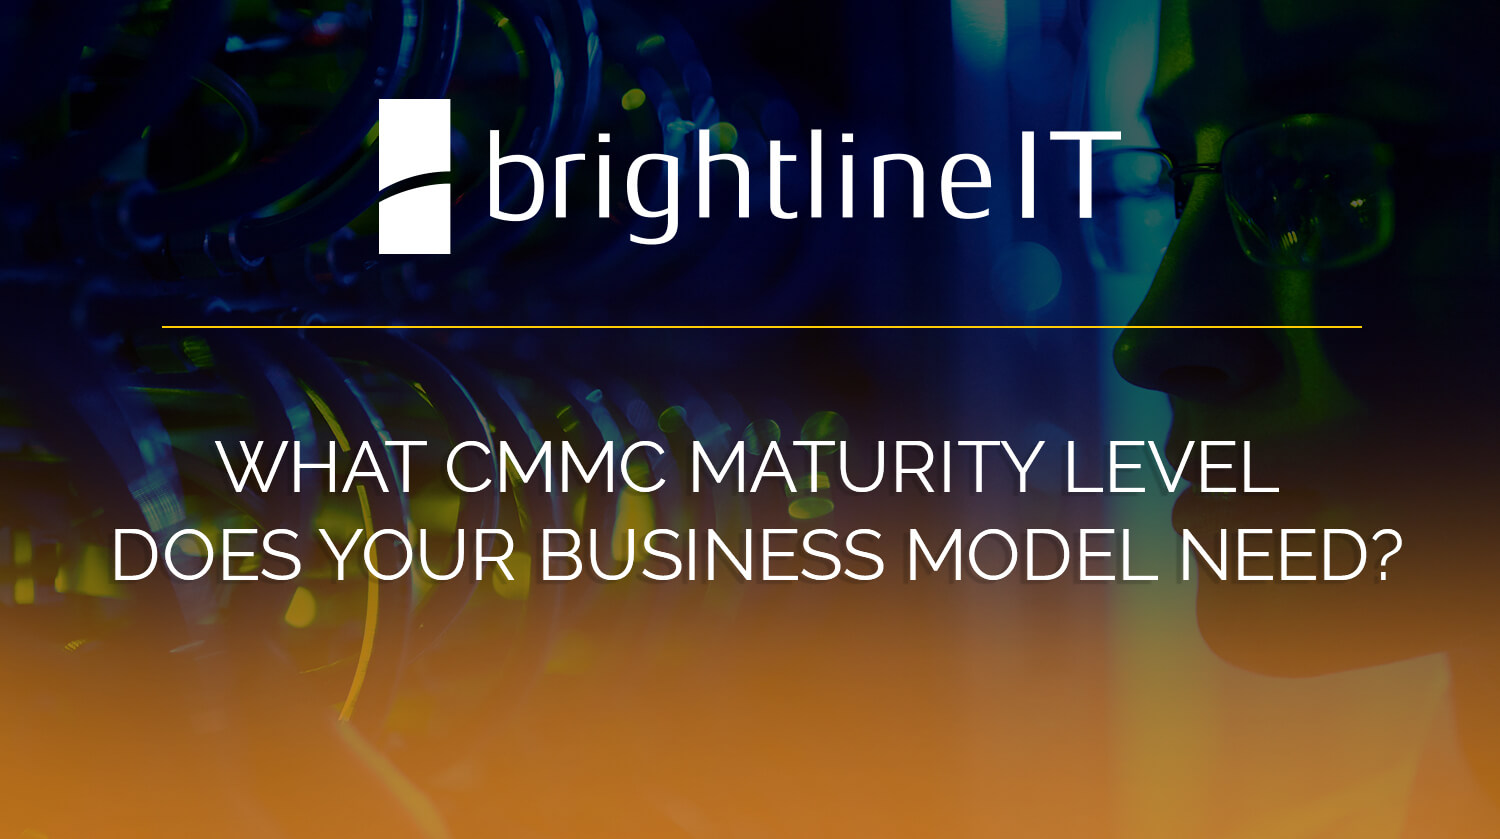 What CMMC Maturity Level does your Business Model Need